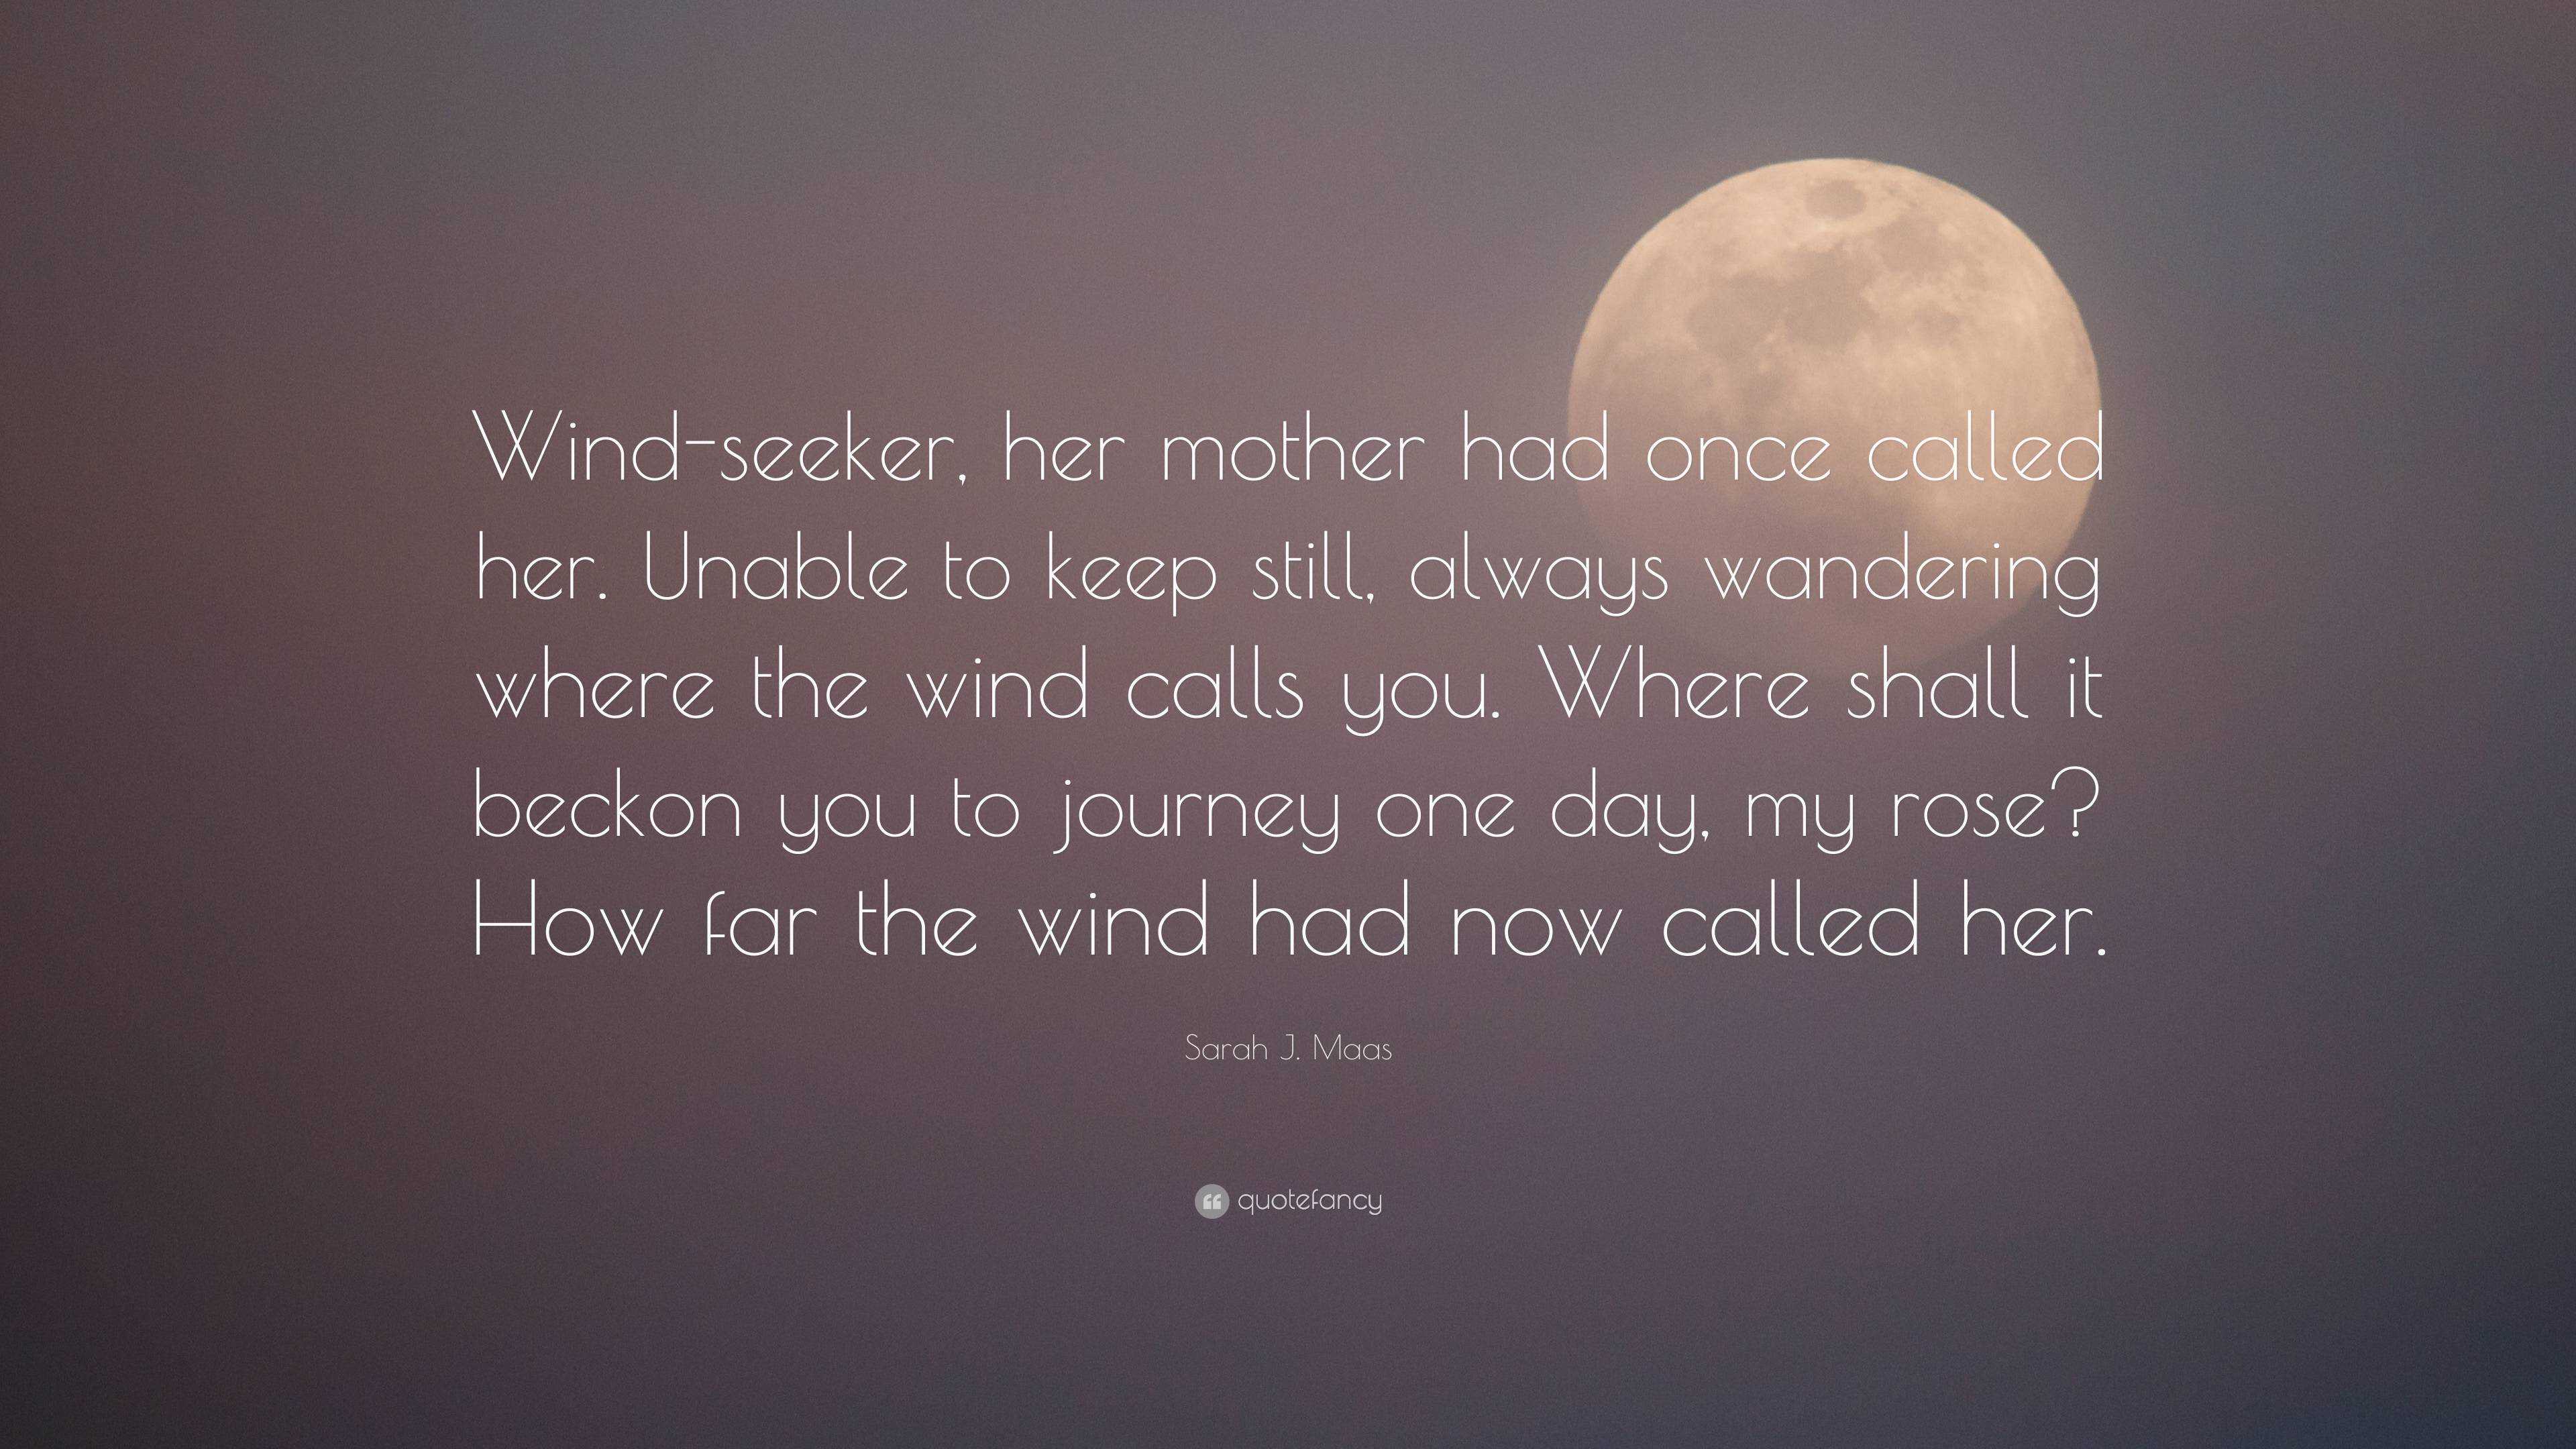 Sarah J. Maas Quote: “Wind-seeker, her mother had once called her ...